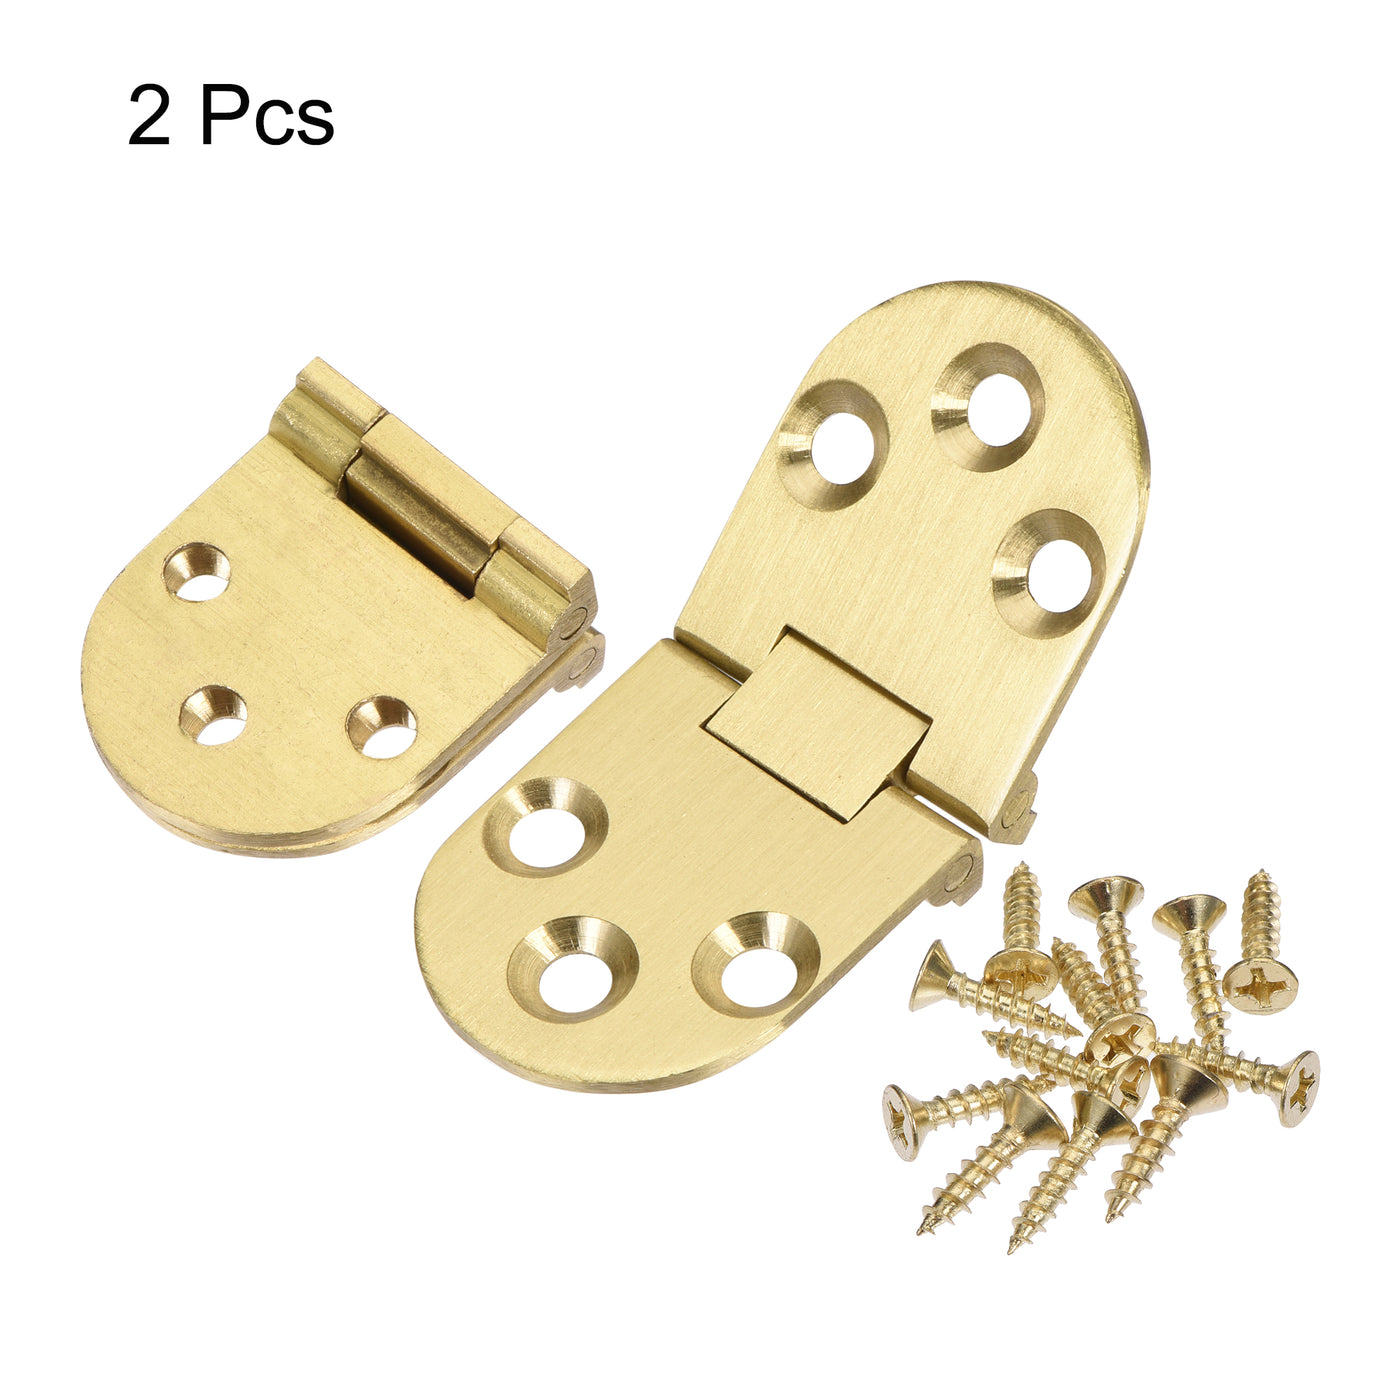 Uxcell Uxcell 3.15x1.18inch Flip Hinges 180 Degree for Sewing Machine Folding Table with Screws Brass Gold Tone 2Pcs